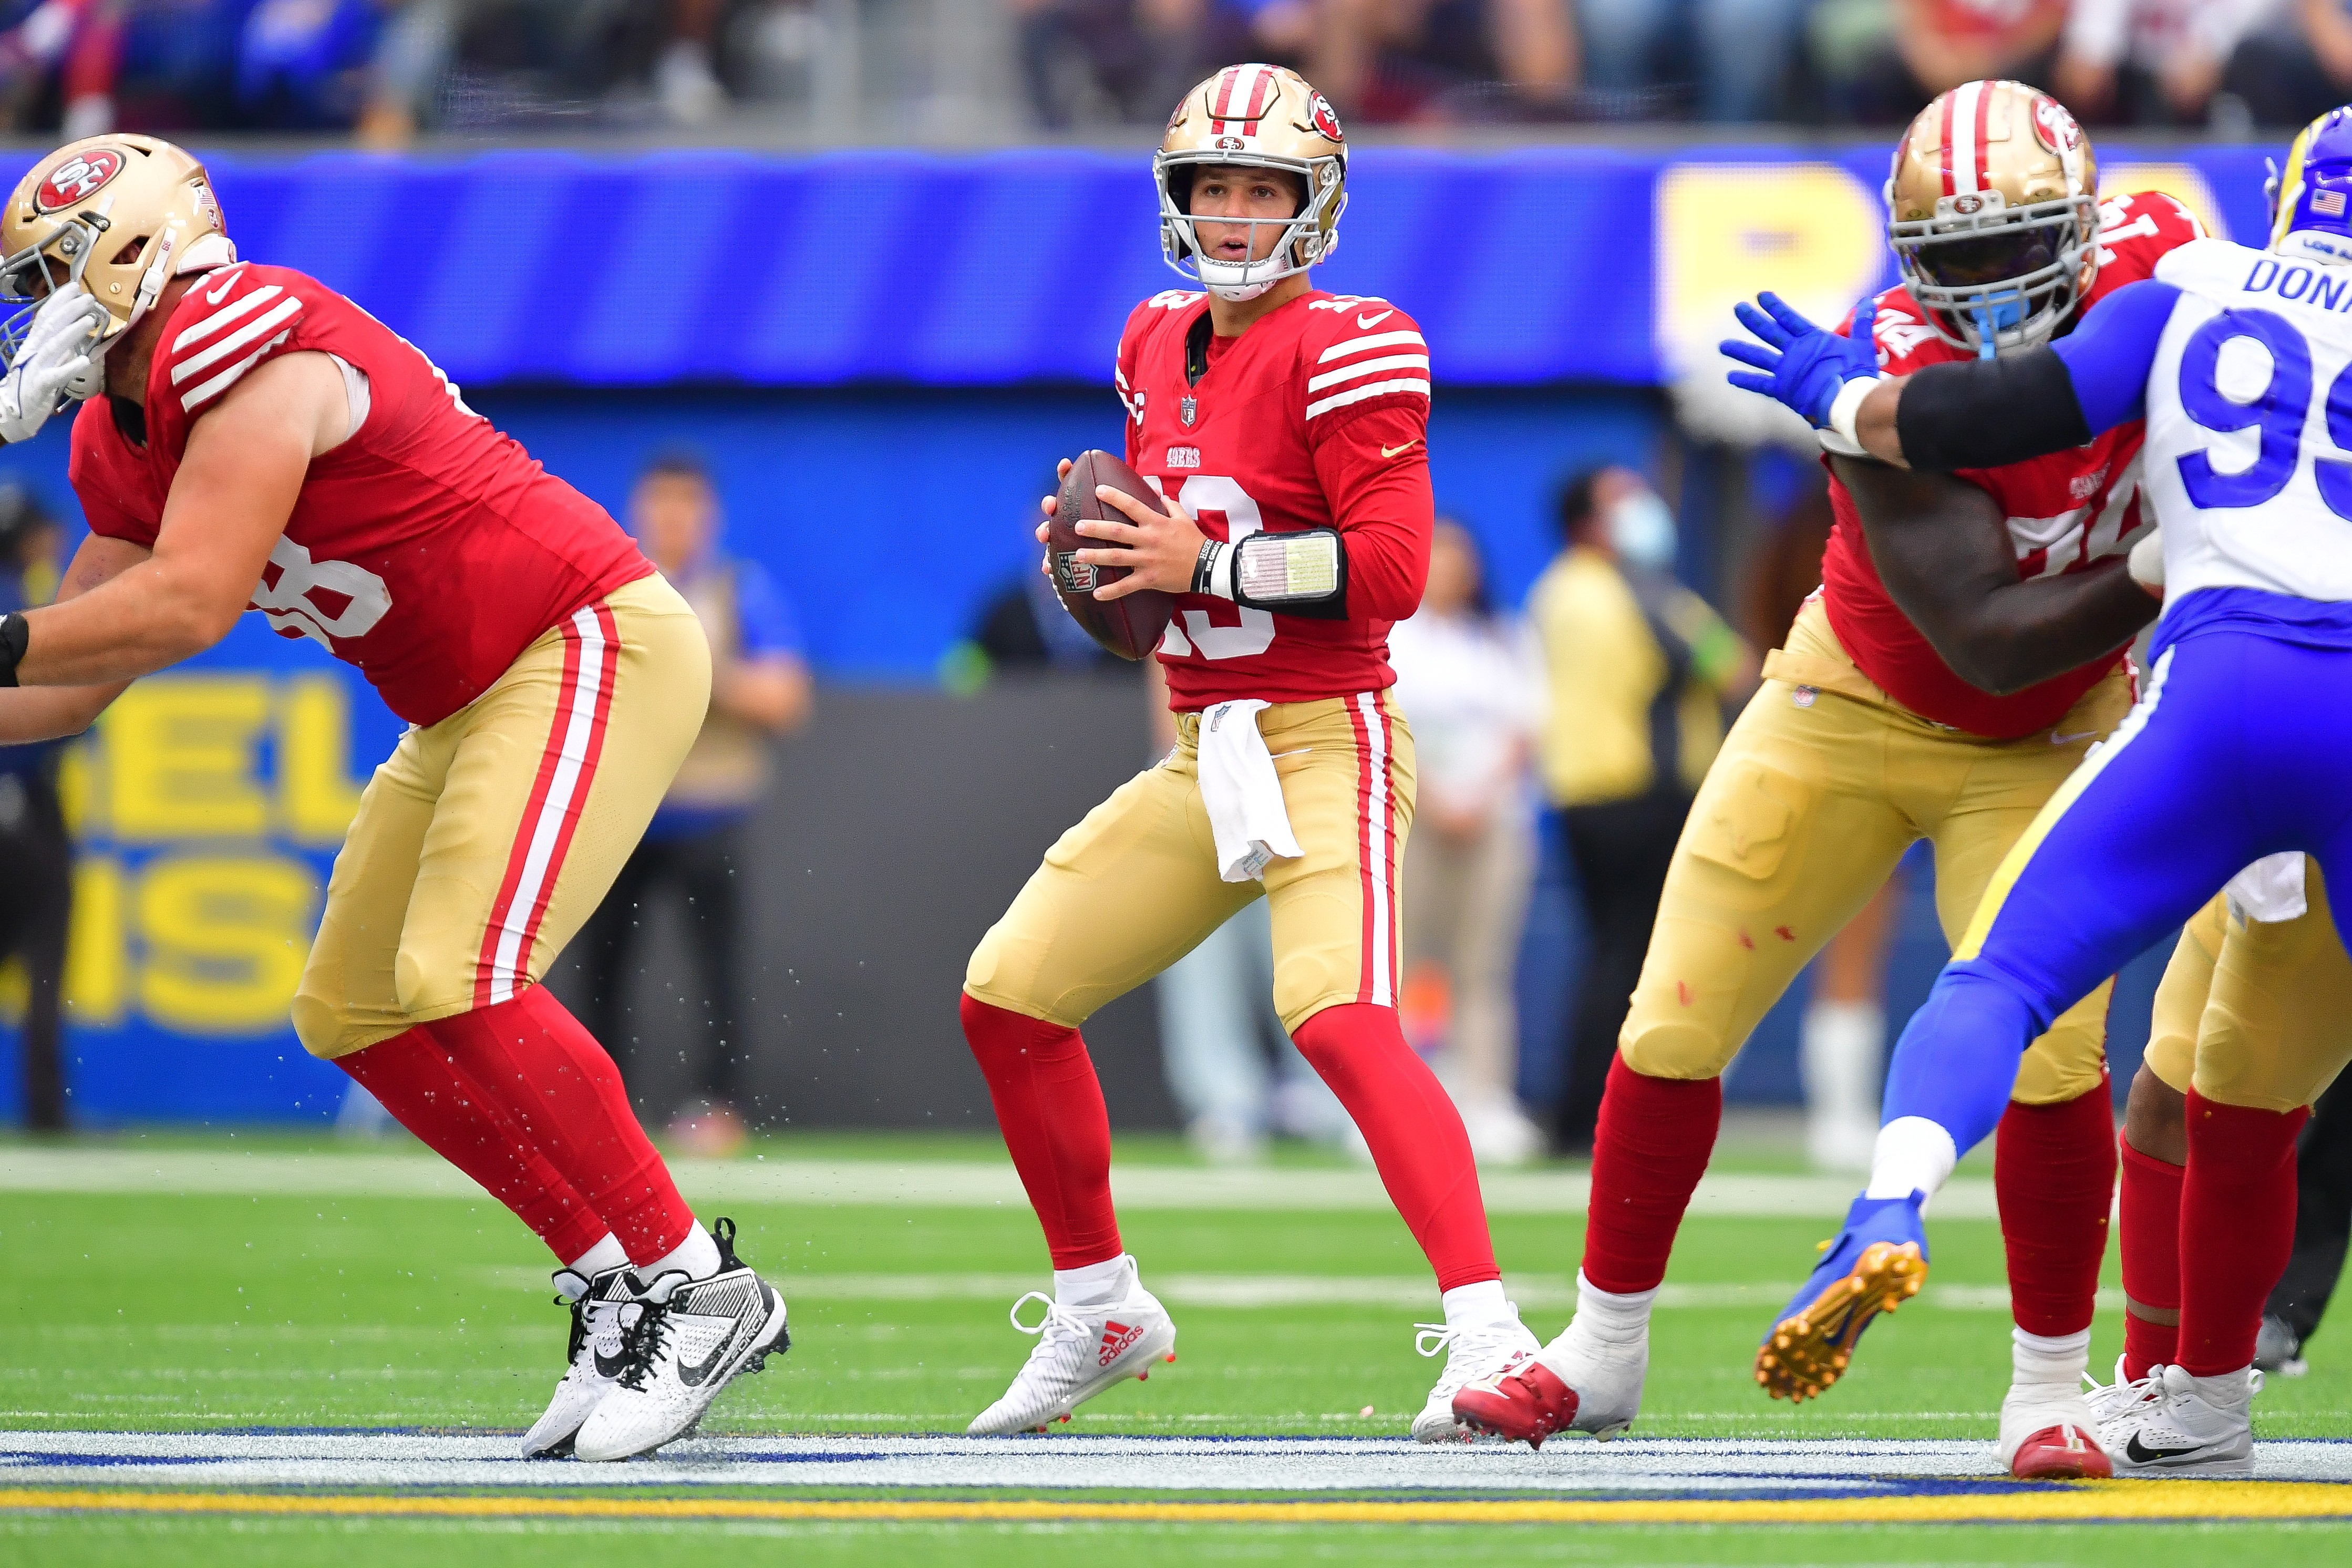 San Francisco 49ers quarterback Brock Purdy (13) drops back to pass against the Los Angeles Rams during the first half at SoFi Stadium.